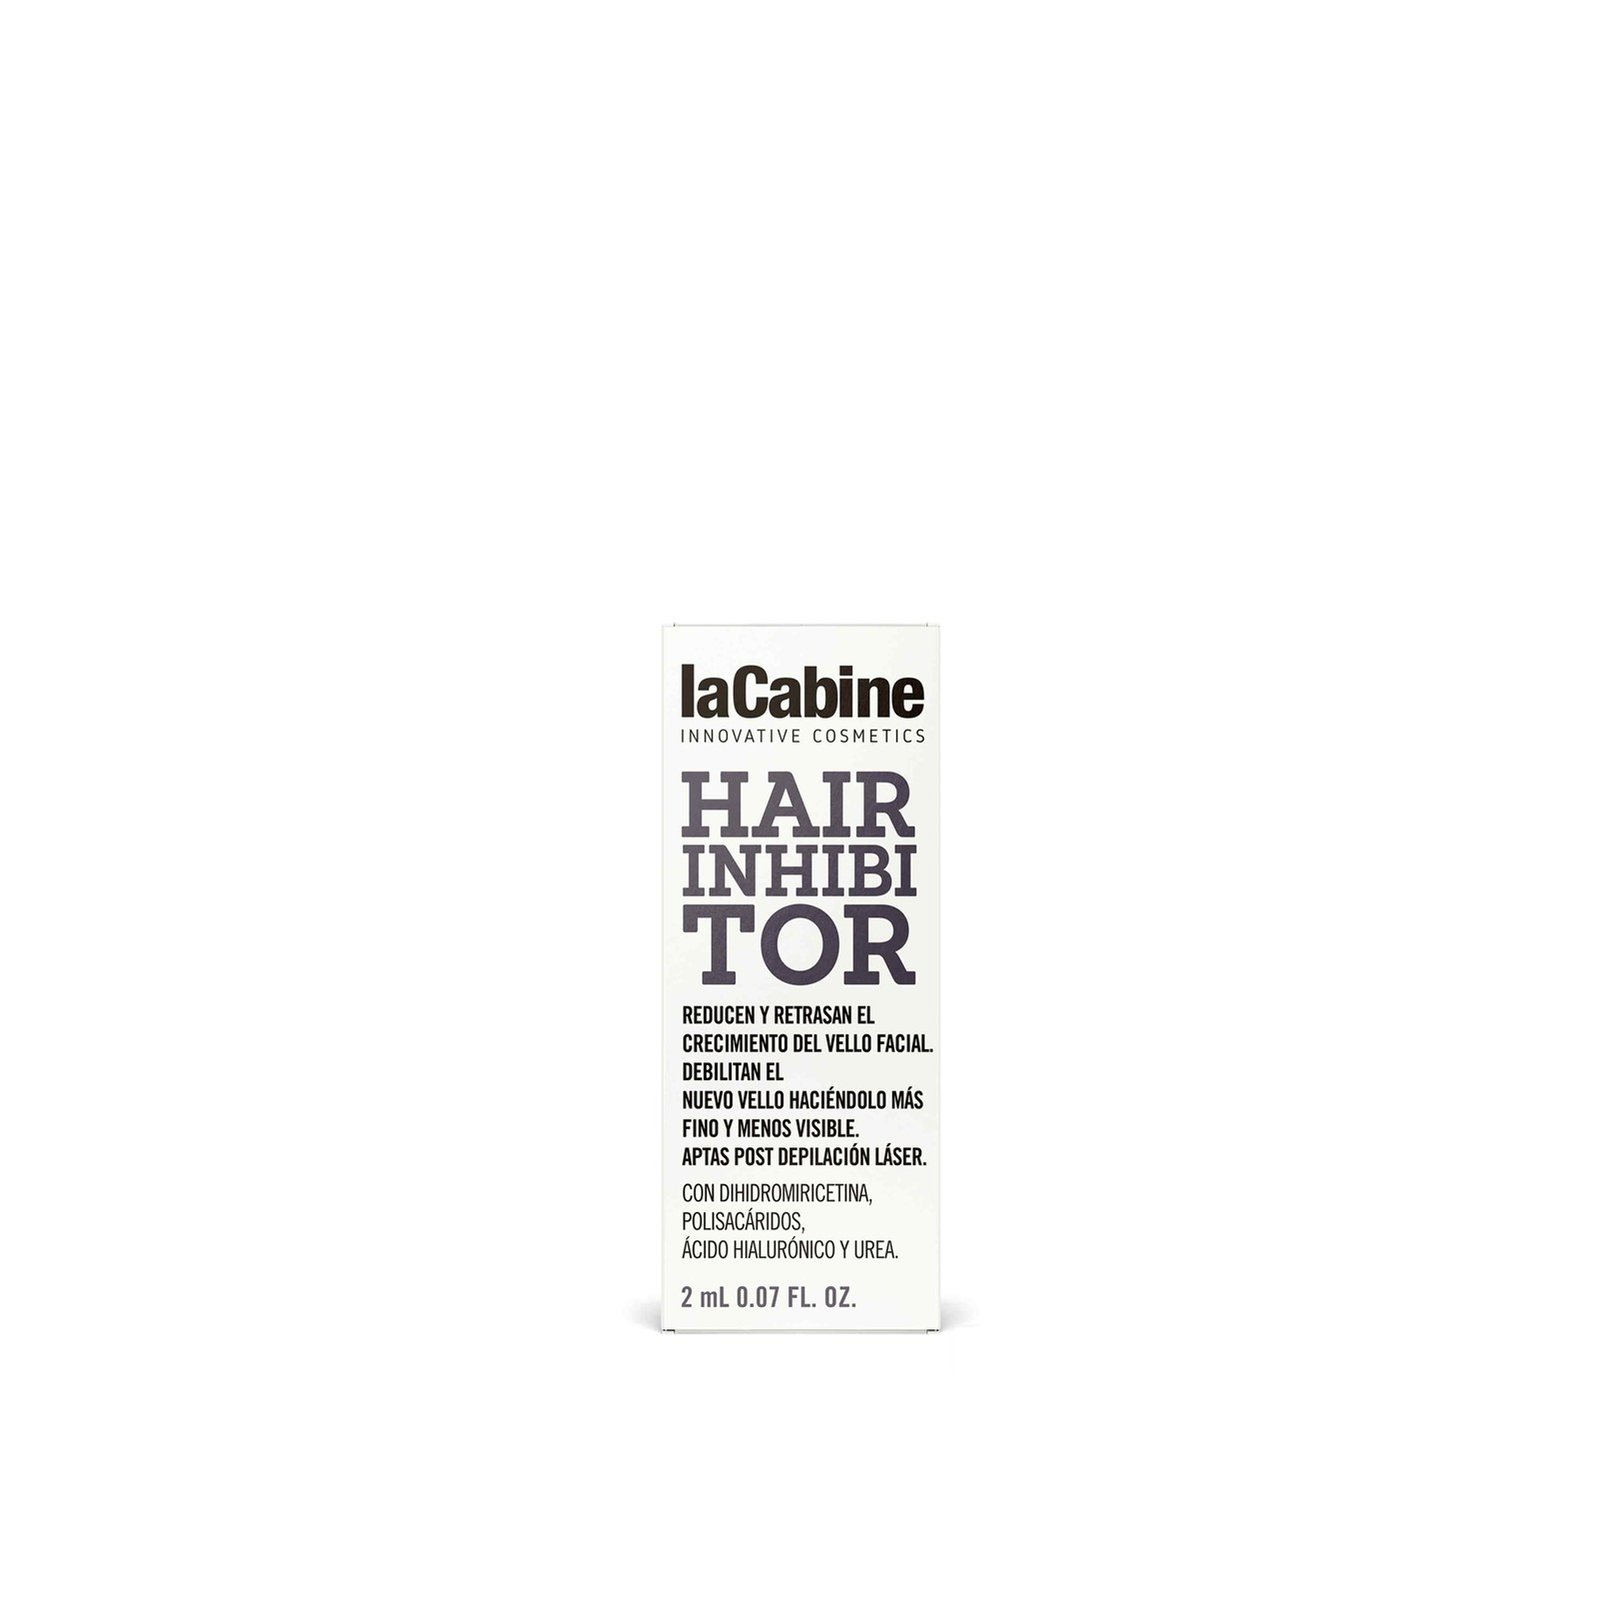 La Cabine Hair Inhibitor Concentrated Ampoules